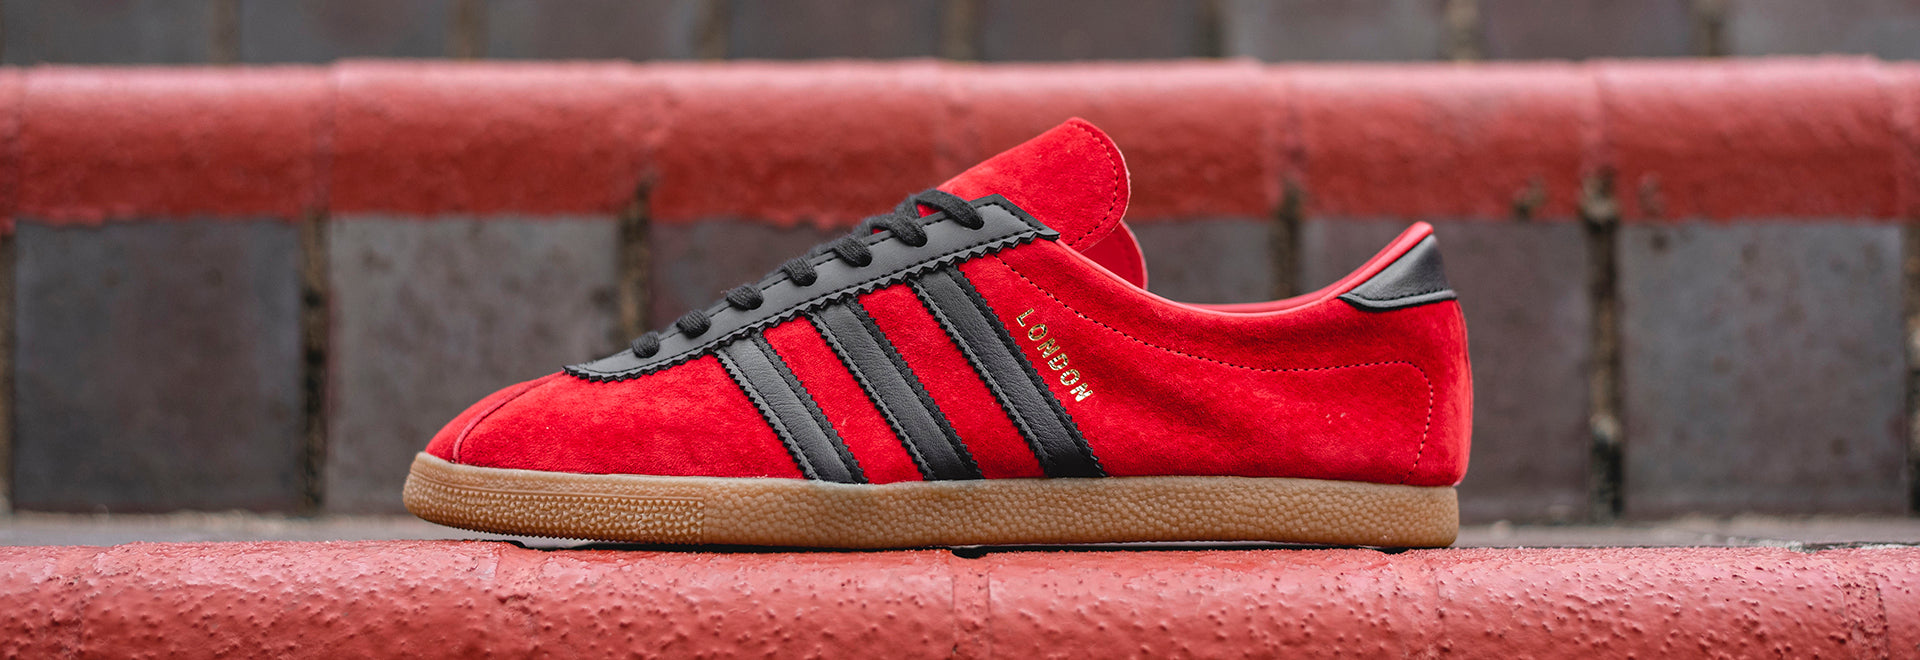 adidas london trainers red black